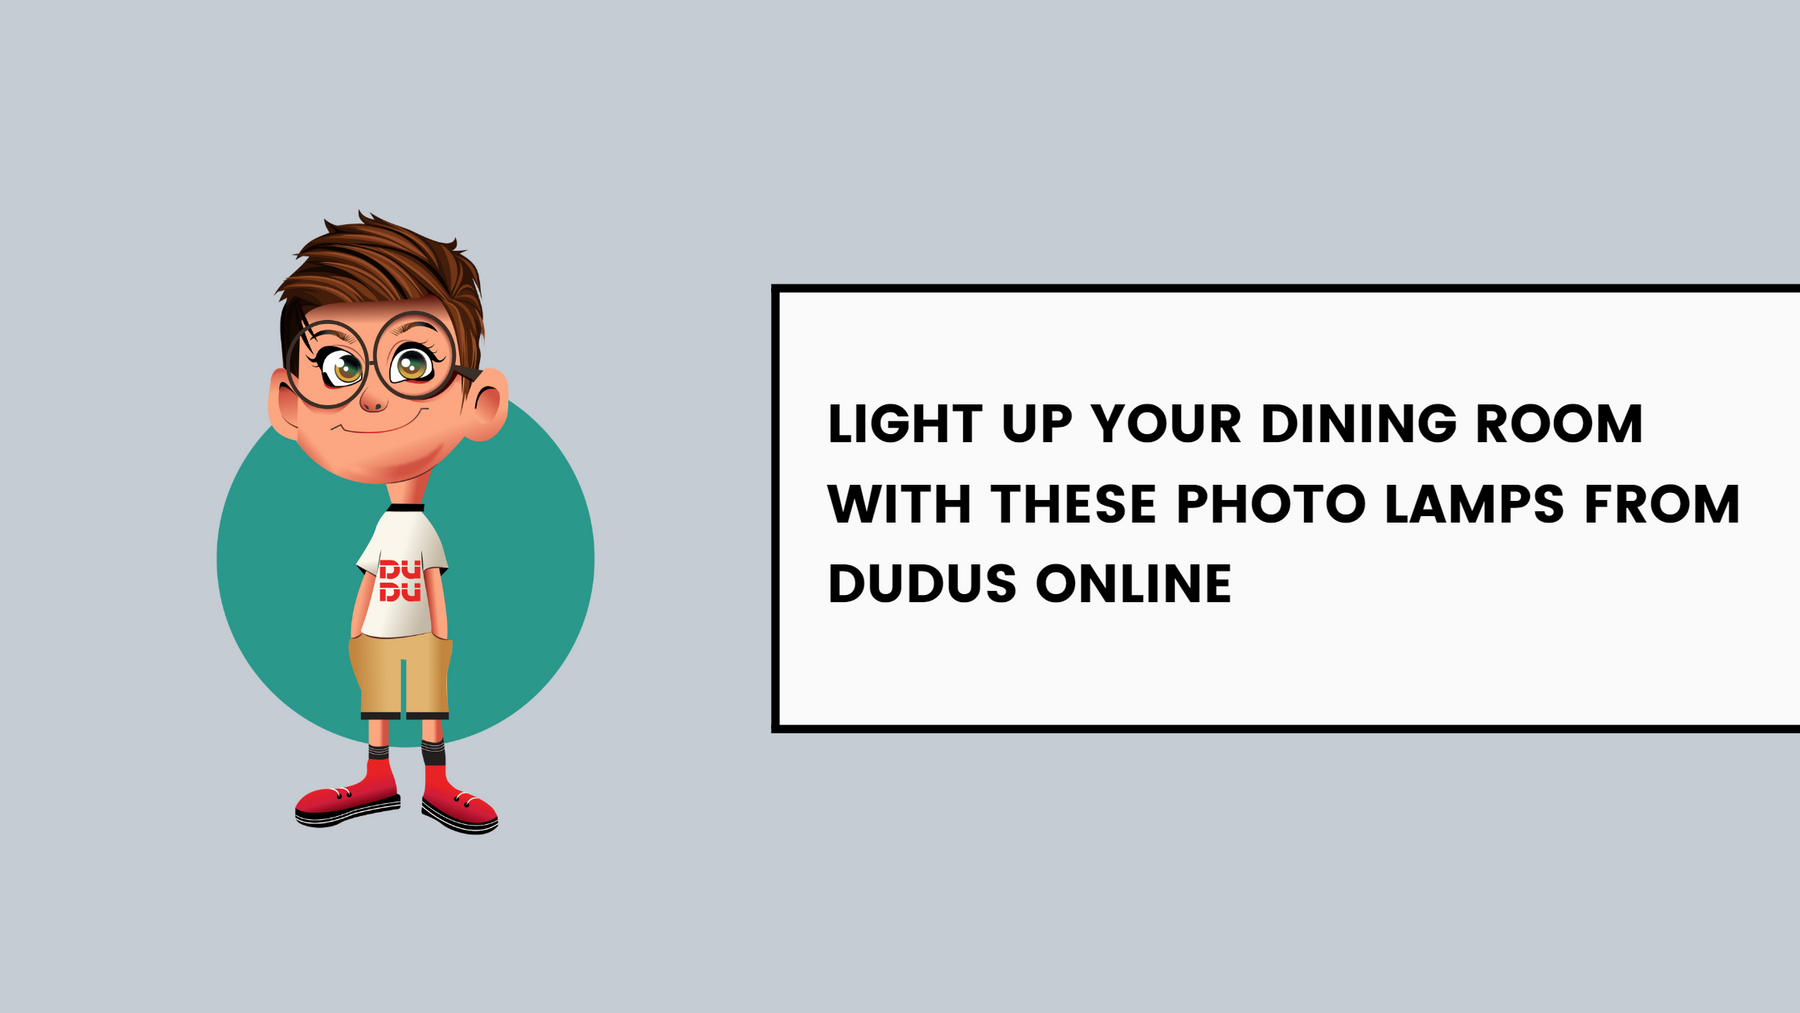 Light Up Your Dining Room With These Photo Lamps From Dudus Online